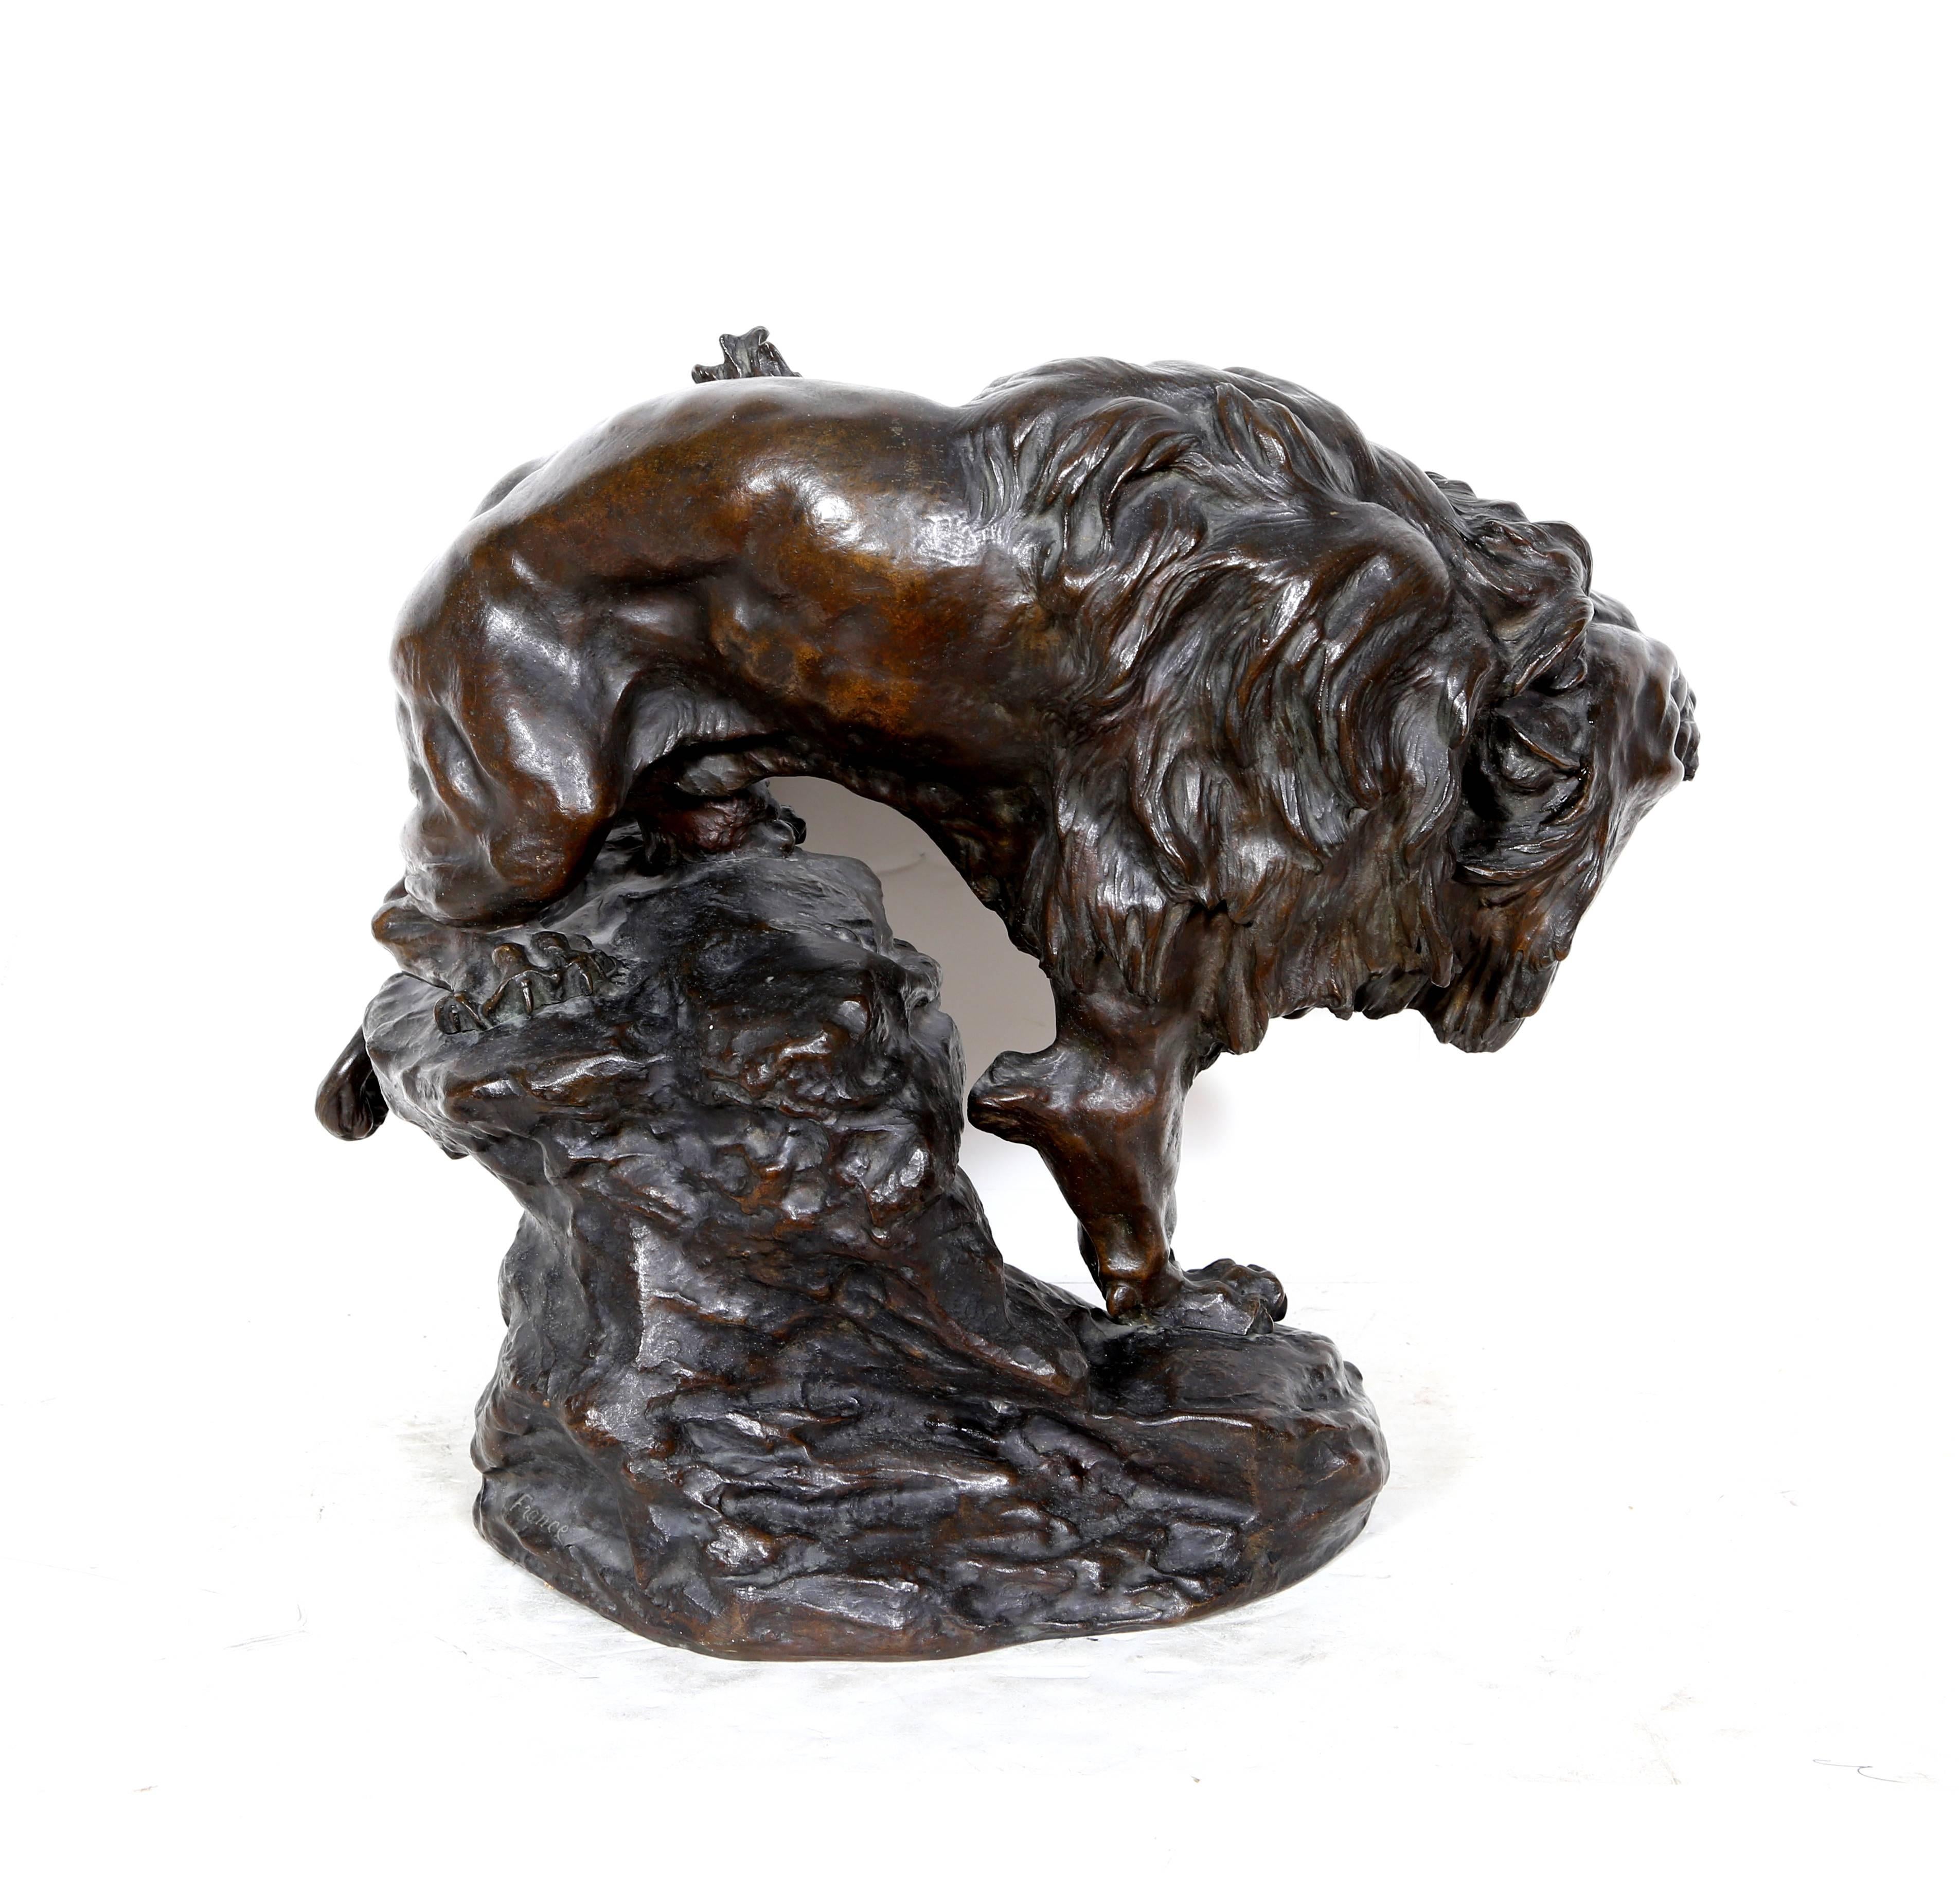 Snarling Lion - Gold Figurative Sculpture by Thomas Francois-Cartier